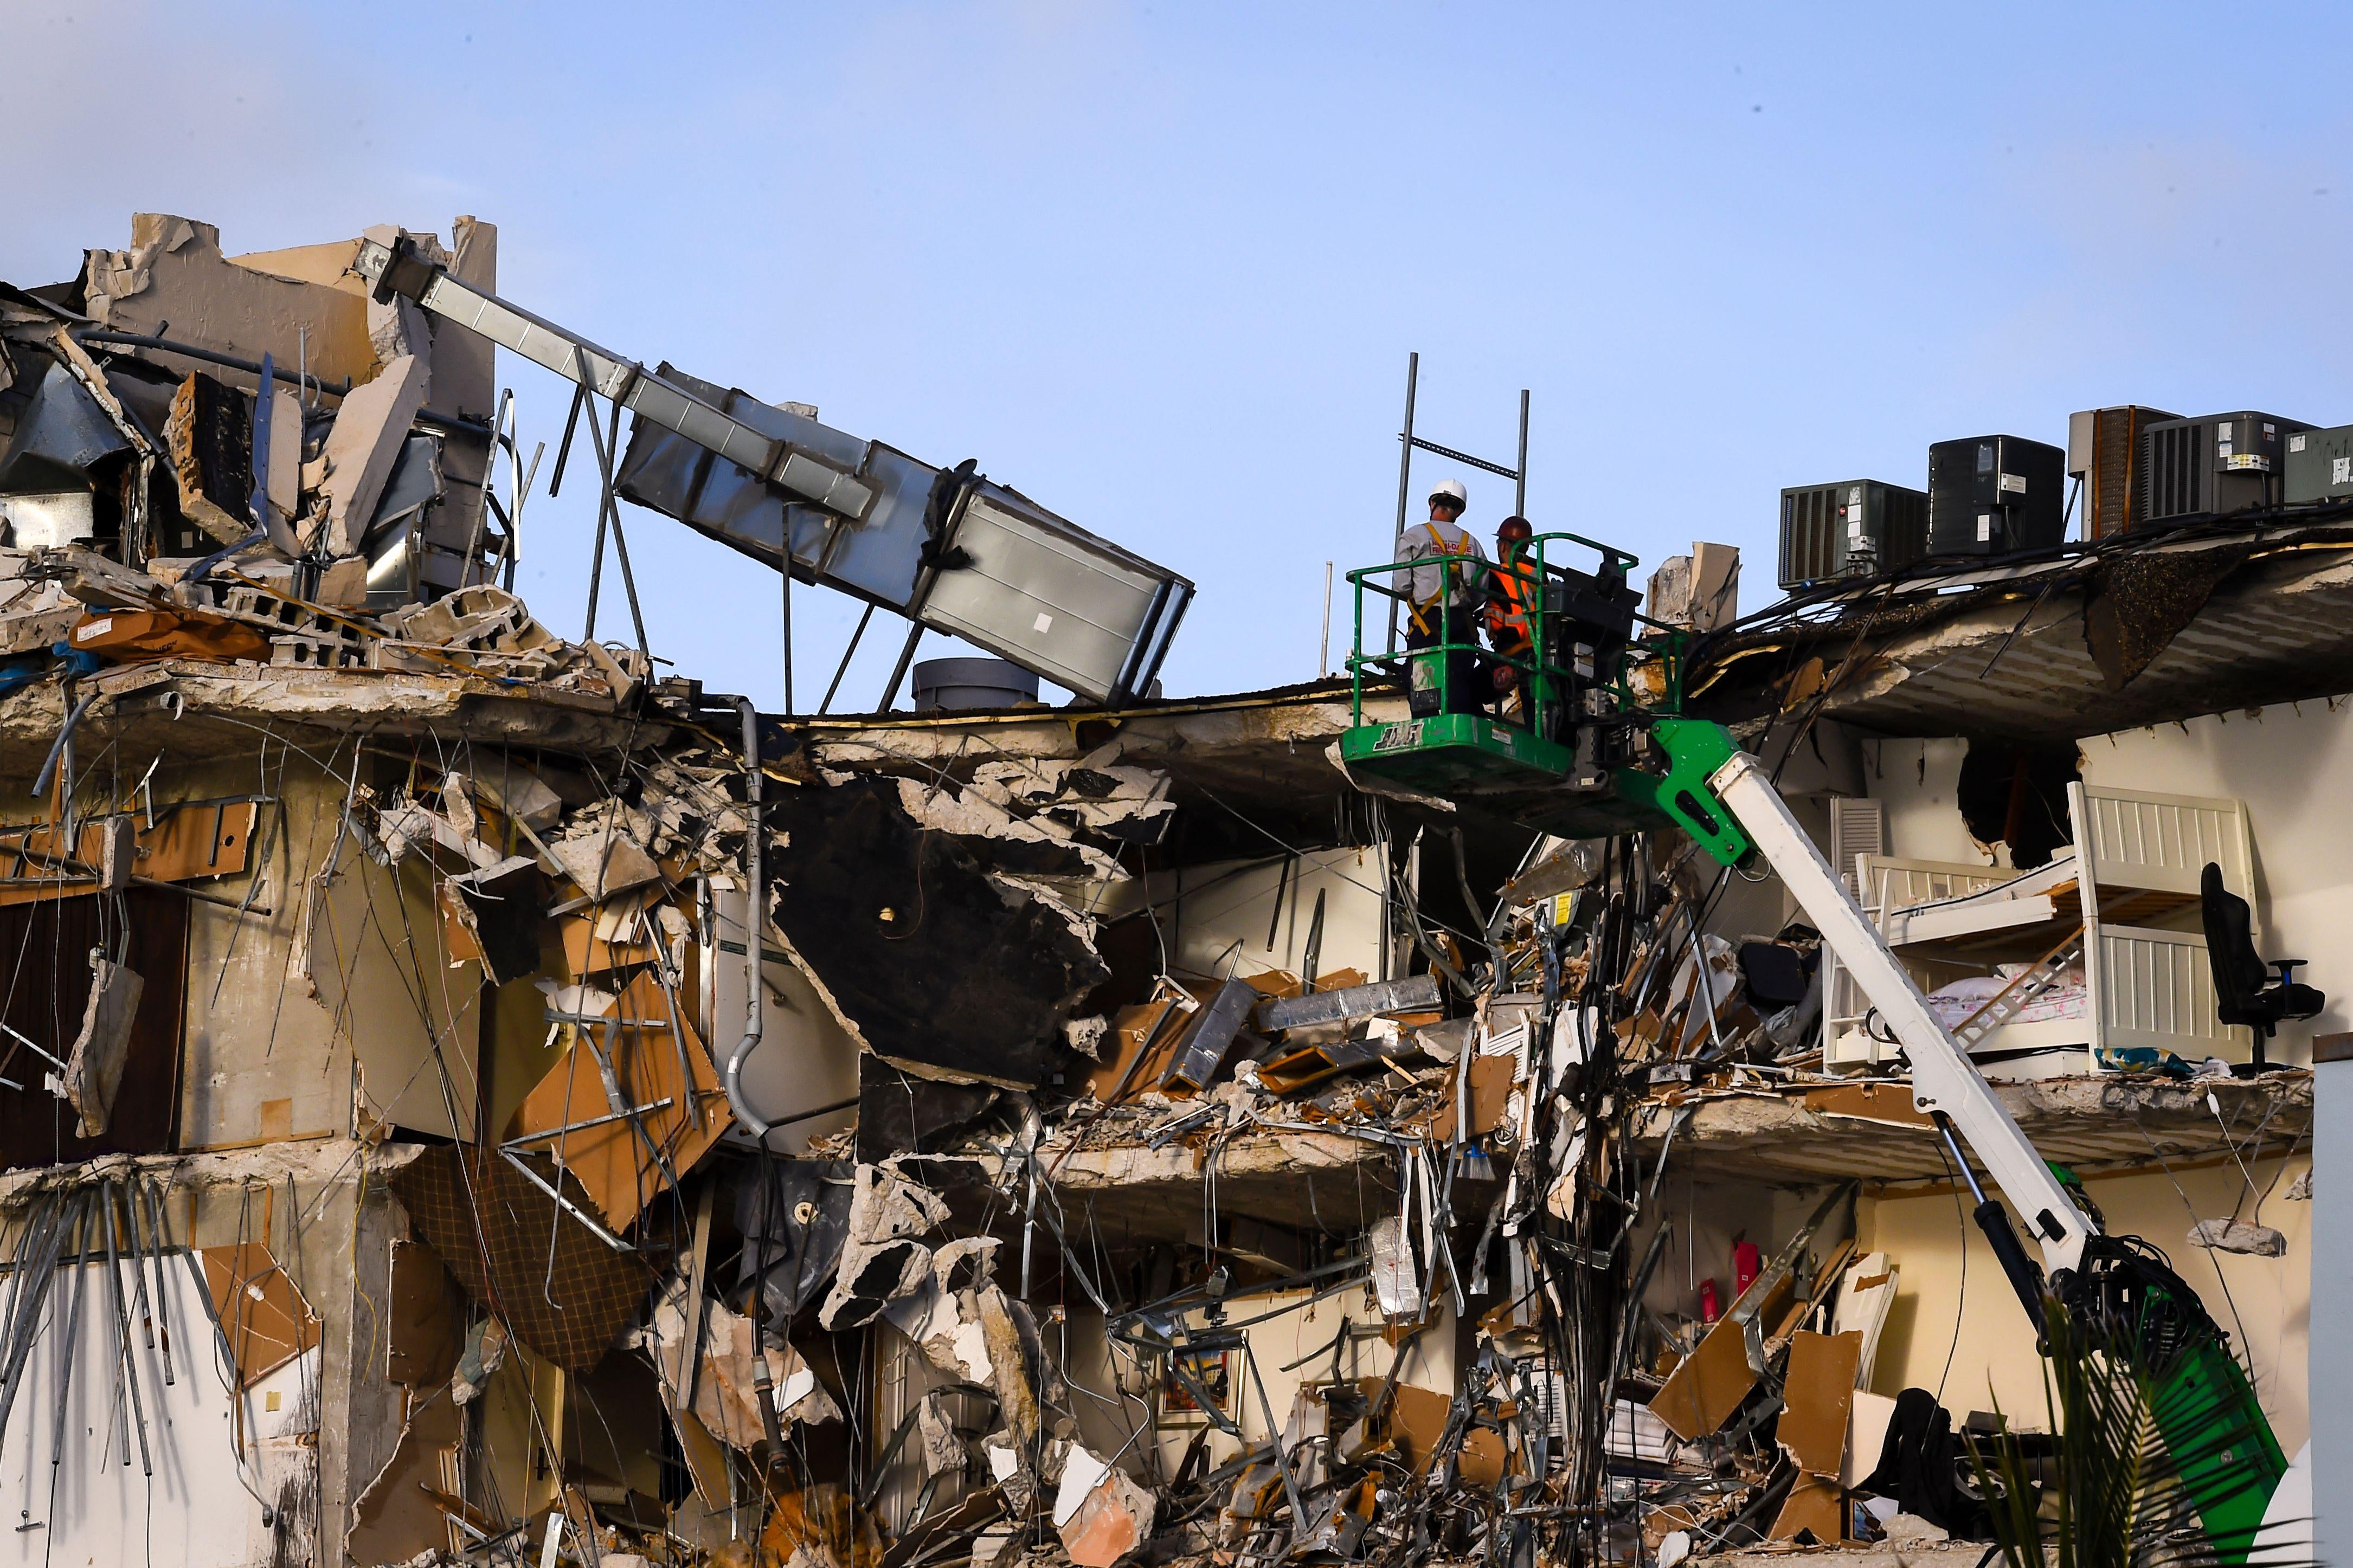 Rescue workers on a green crane stand above the wreckage of a partially collapsed building in Surfside north of Miami Beach, Florida.